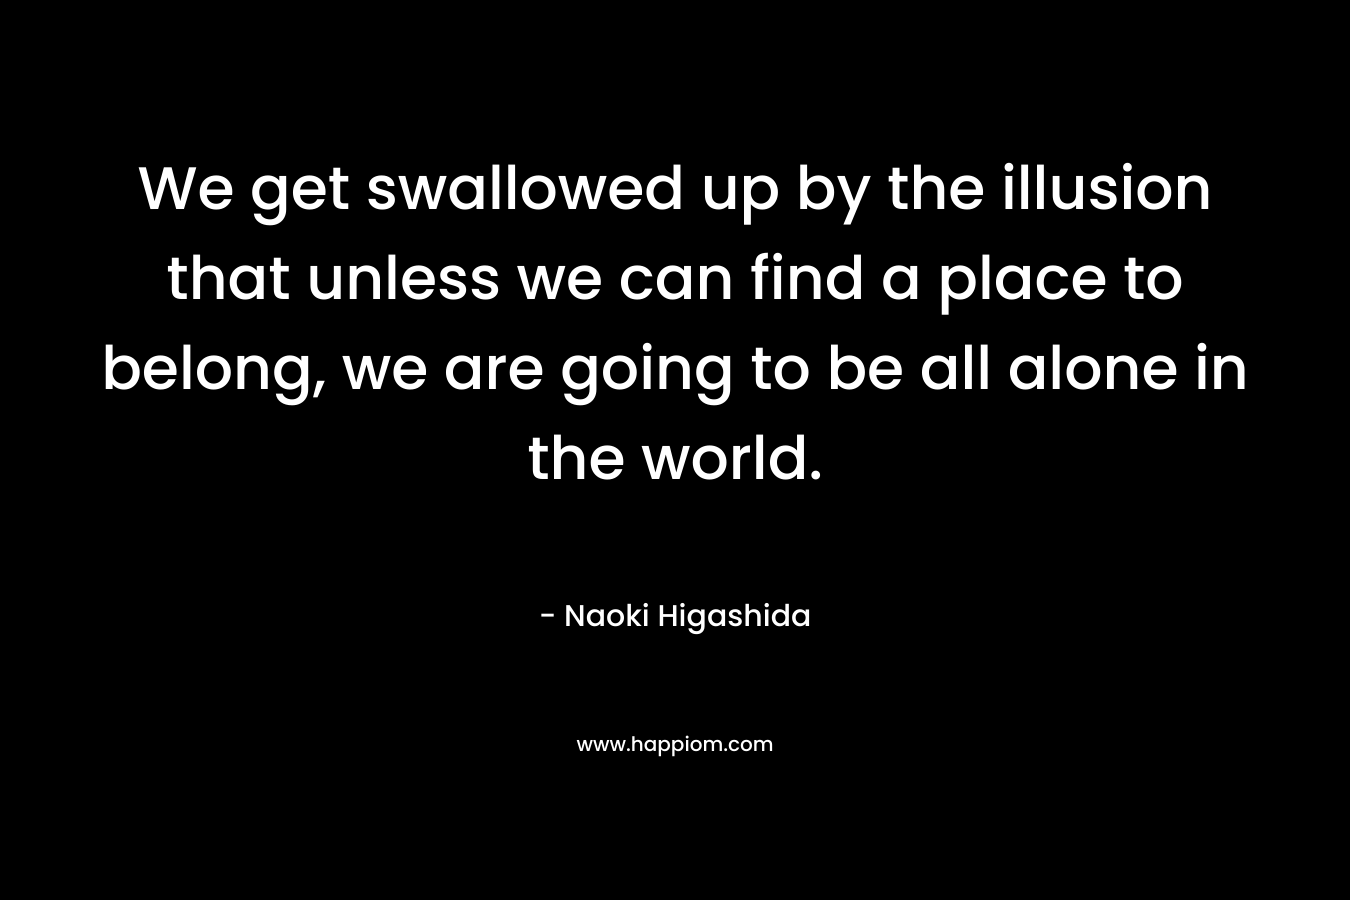 We get swallowed up by the illusion that unless we can find a place to belong, we are going to be all alone in the world.